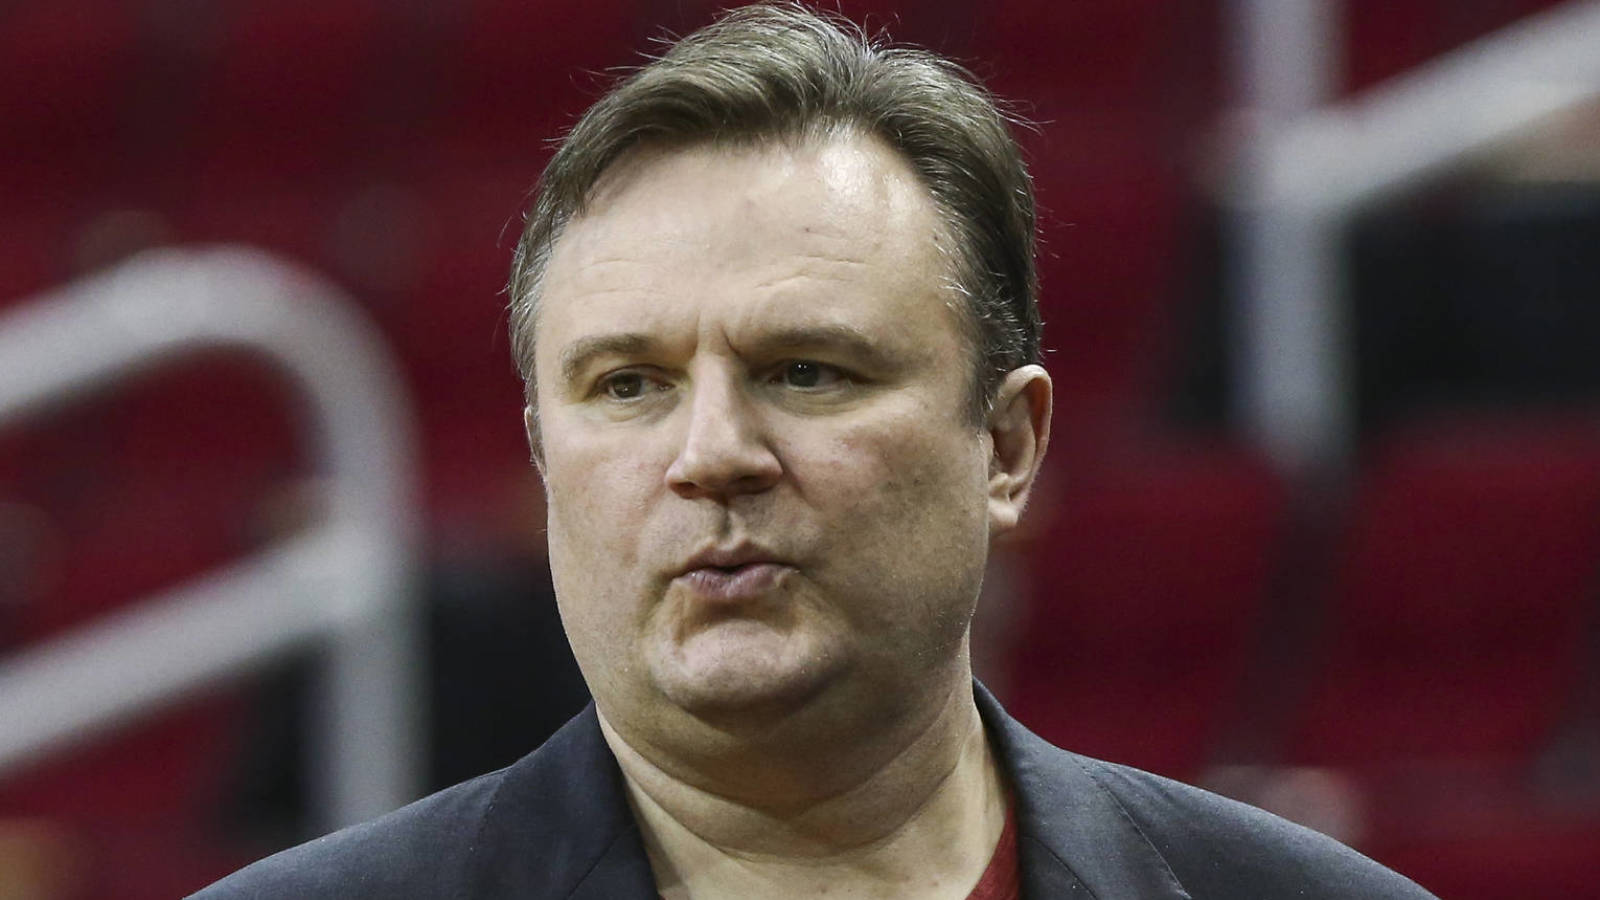 Could Daryl Morey explore opportunities in NFL?